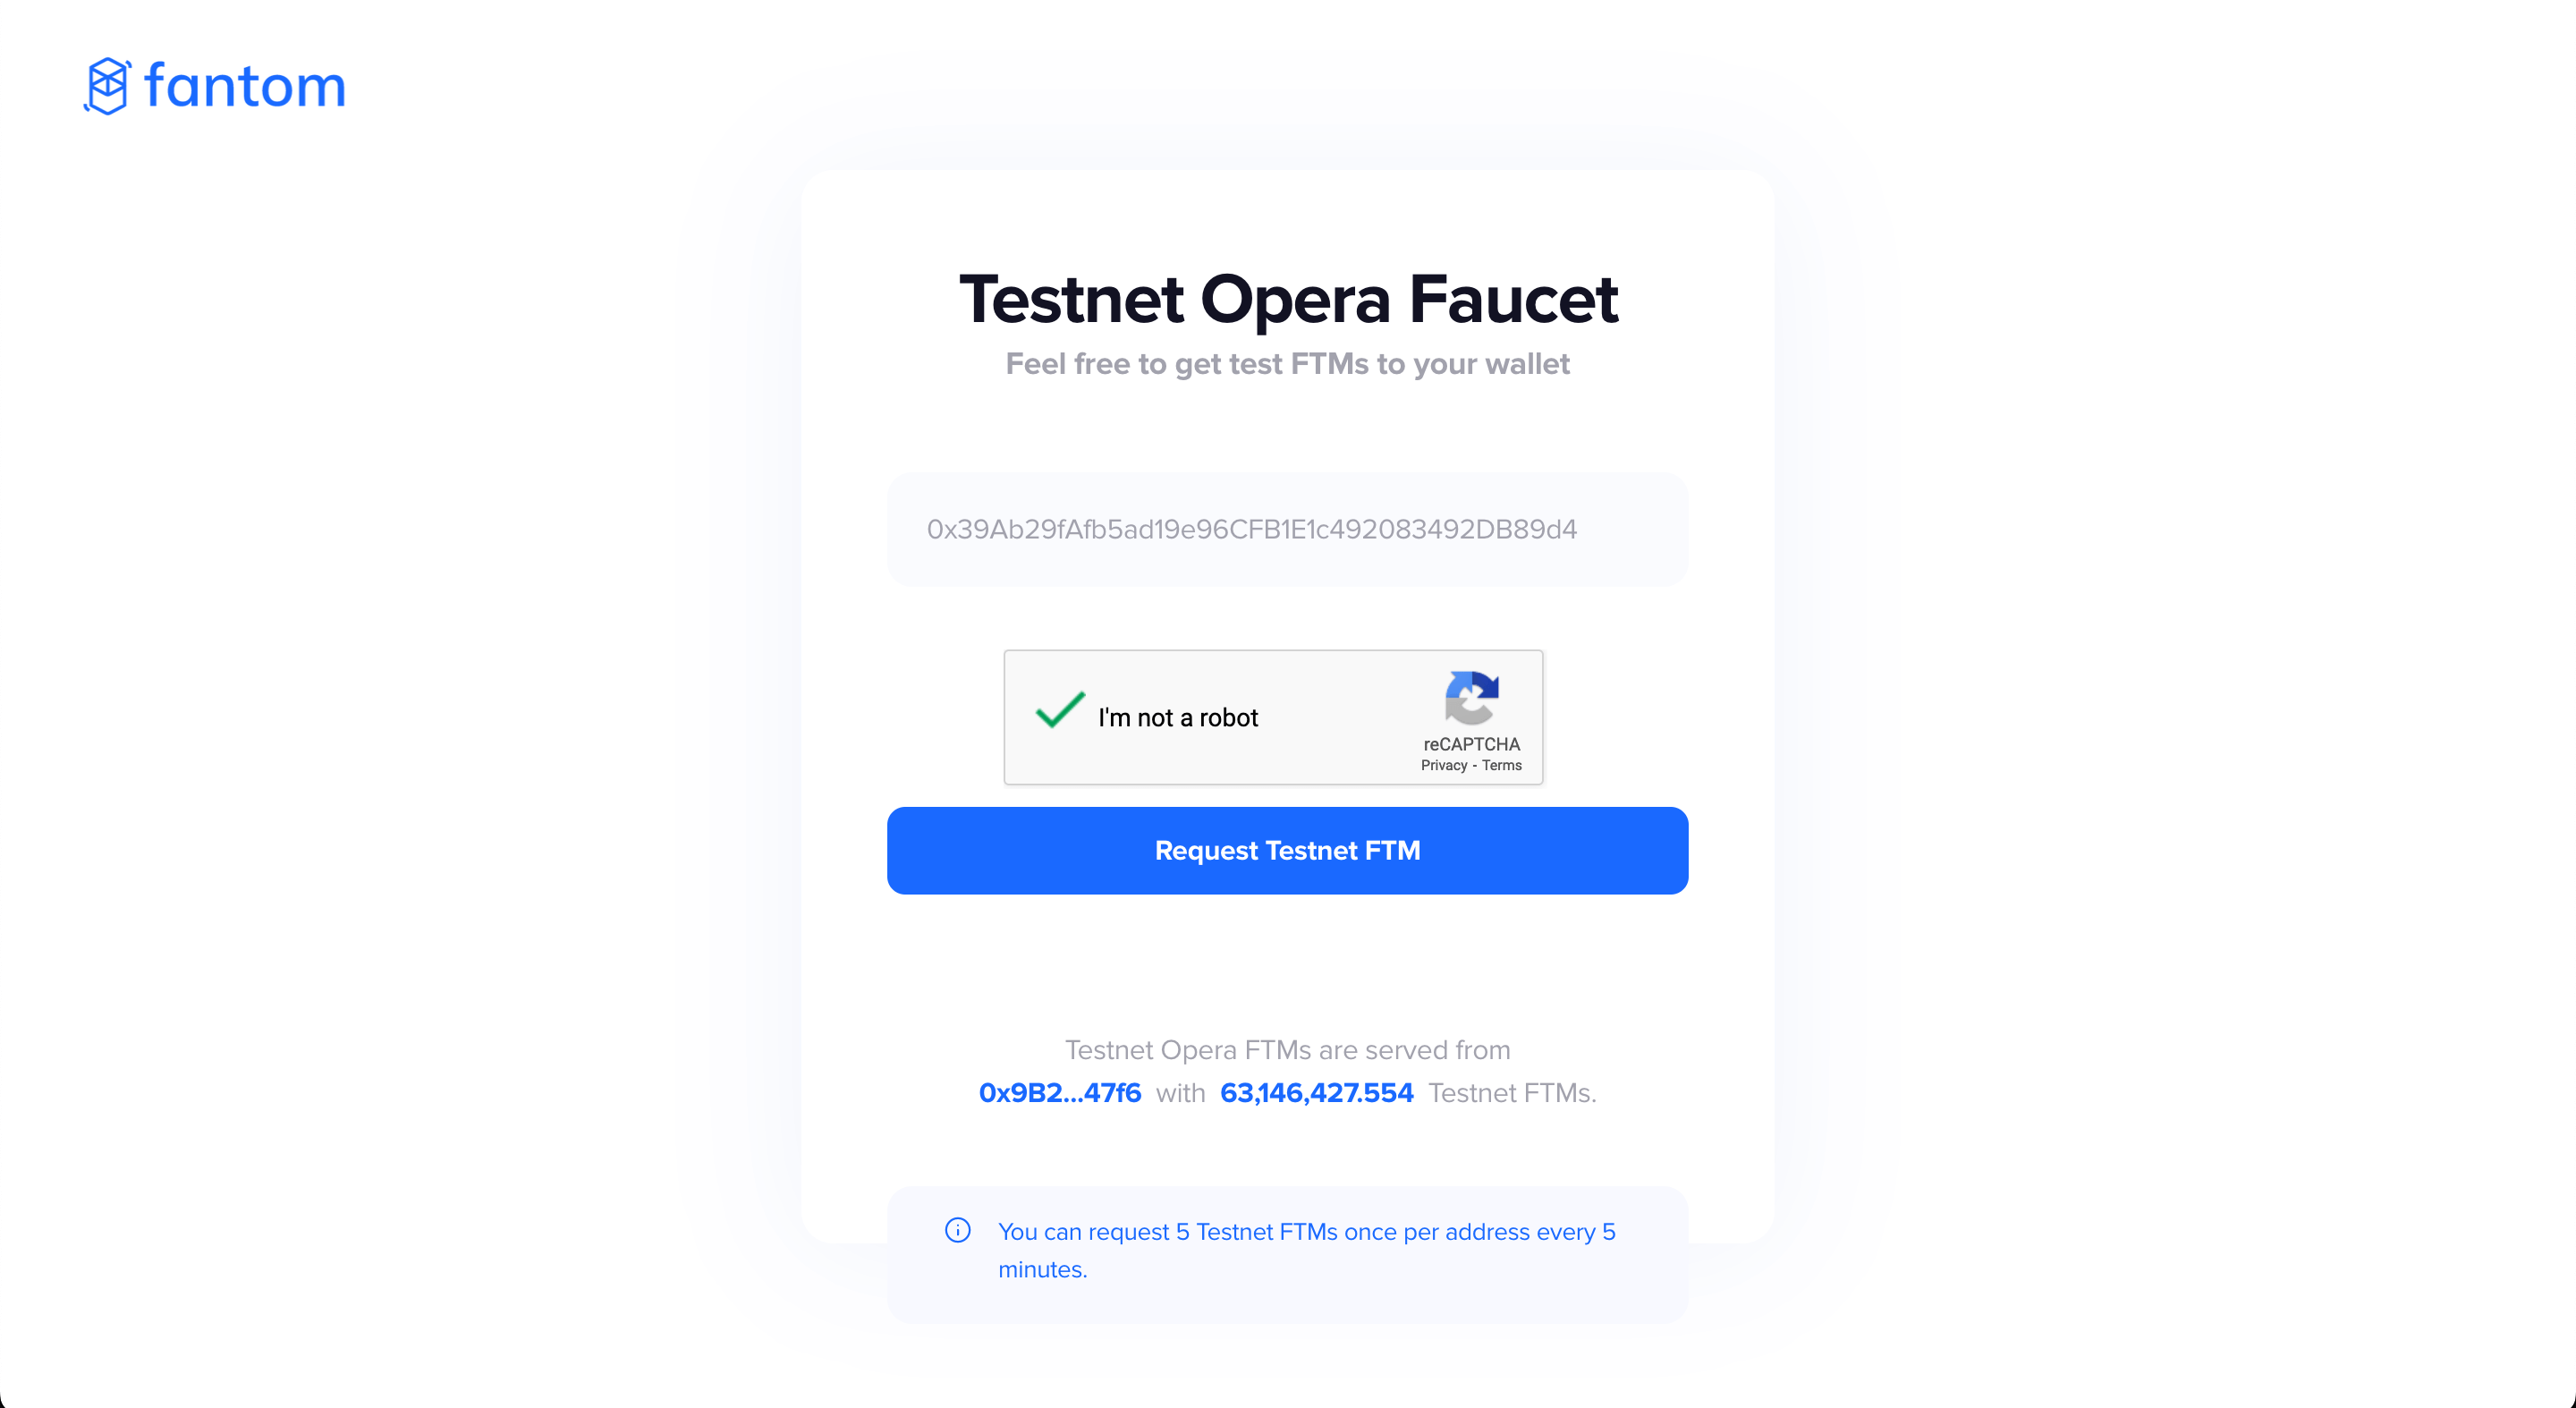 Paste in your wallet address and click on Request Testnet FTM